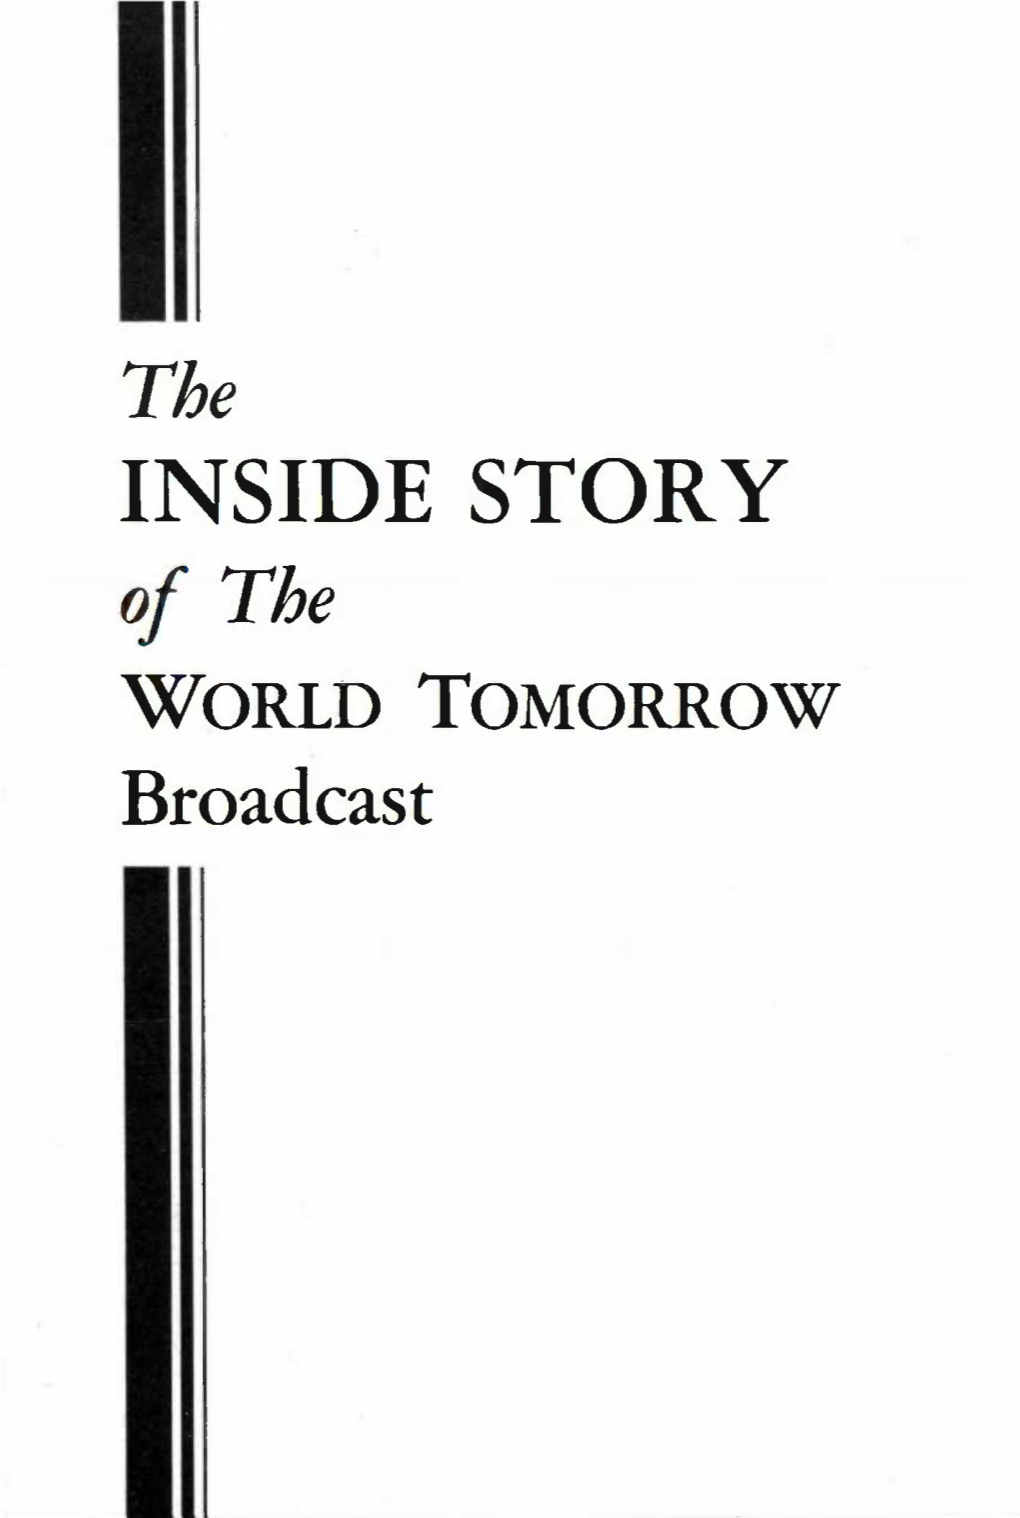 The INSIDE STORY of the WORLD TOMORROW Broadcast